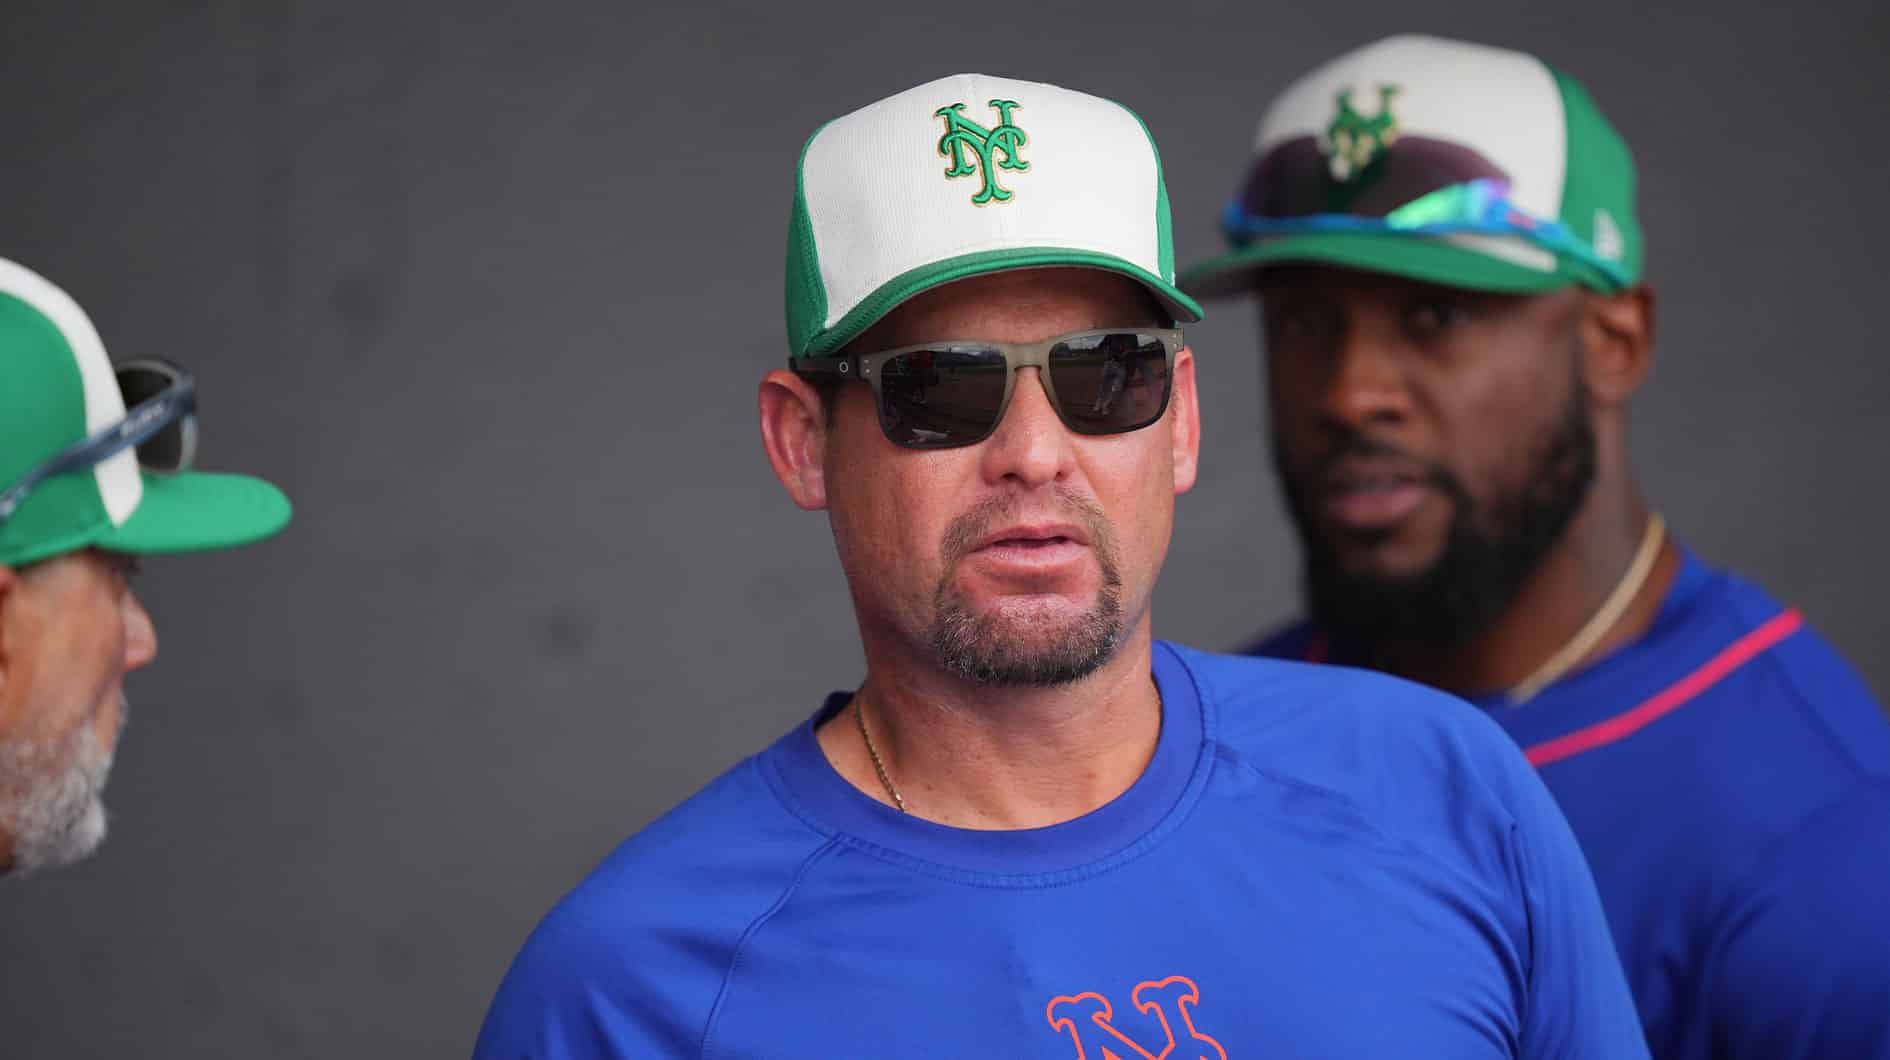 New York Mets manager Carlos Mendoza wears the St. Patrick’s Day ball cap for the game against the Miami Marlins at Clover Park.